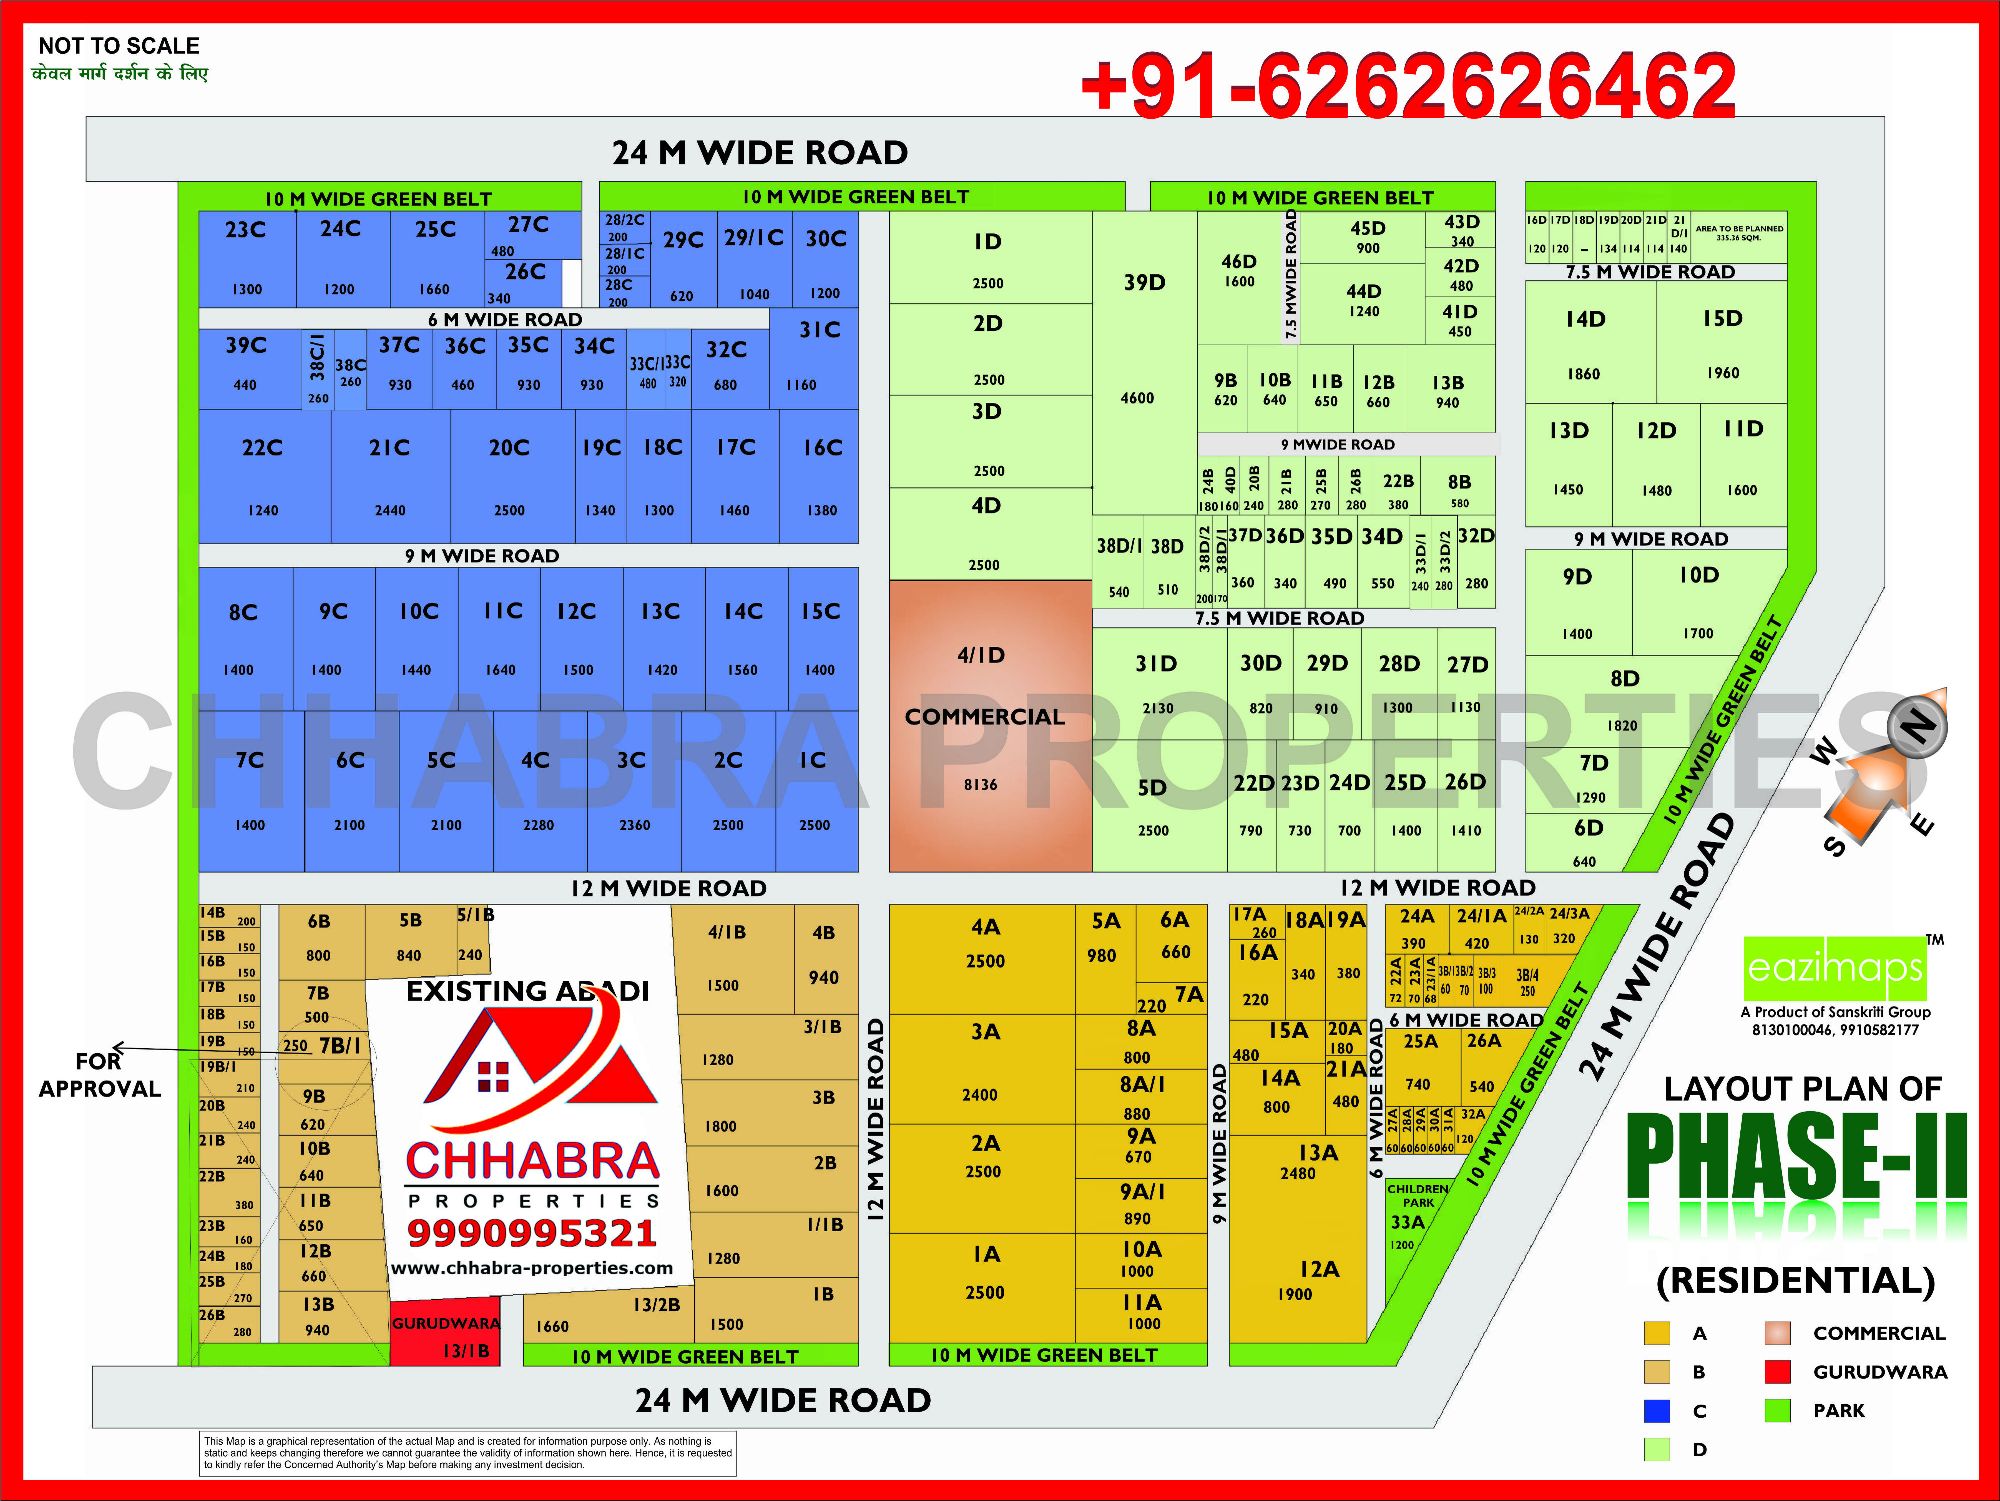 layout plan of phase iiresidential